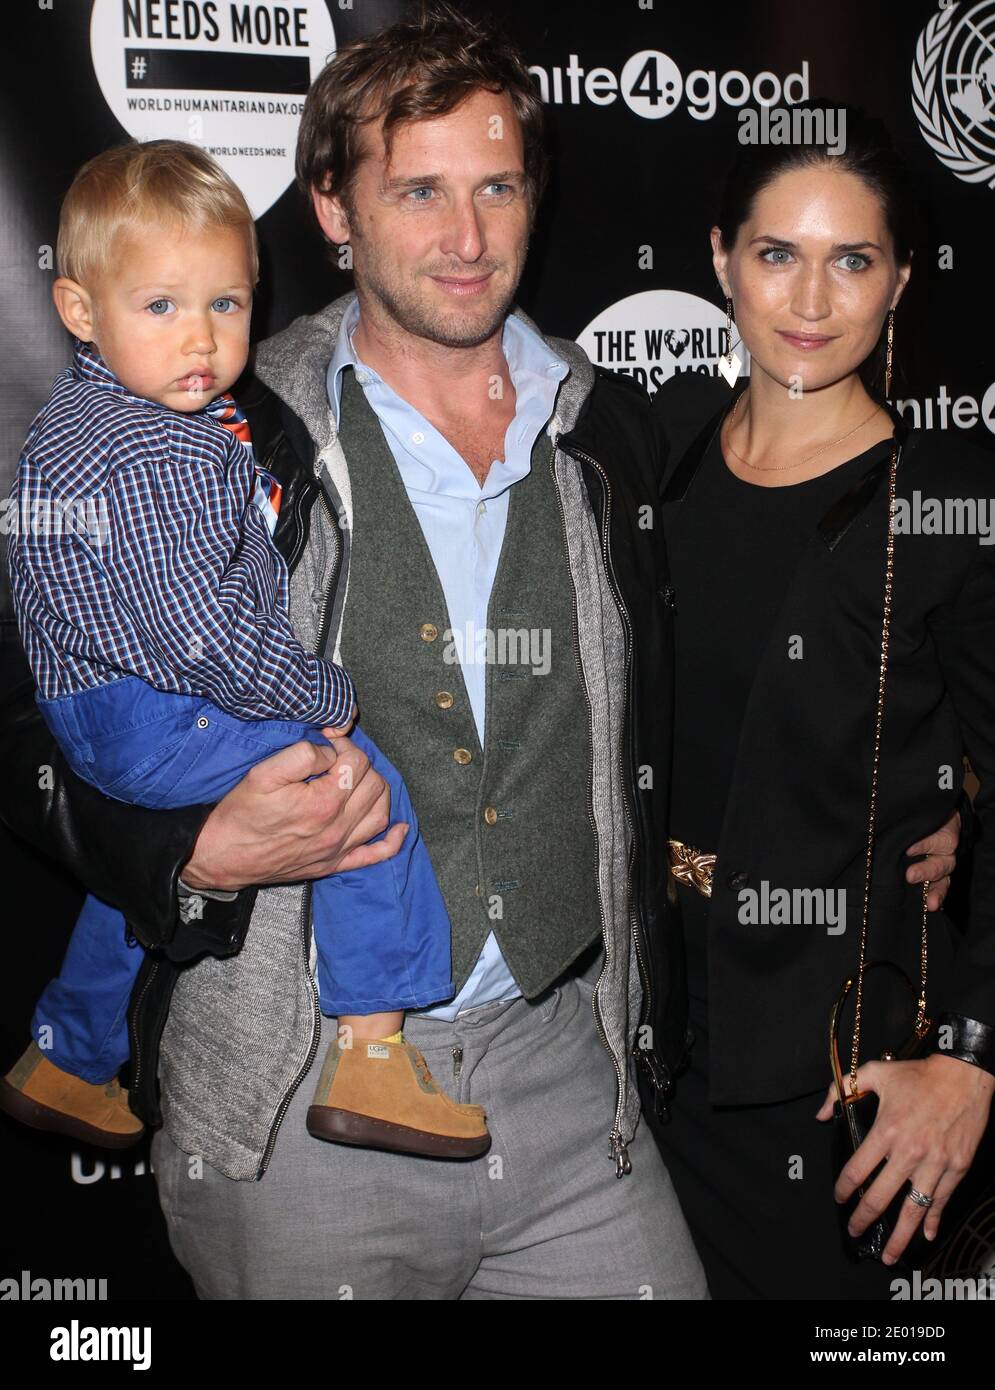 Actor Josh Lucas with his wife Jessica Henriquez and their son Noah attend the premiere of David Guetta's new music video 'One Voice' onto the front of United Nations headquarters in New York City, NY, USA, on November 22, 2013. Photo by Charles Guerin/ABACAPRESS.COM. Stock Photo